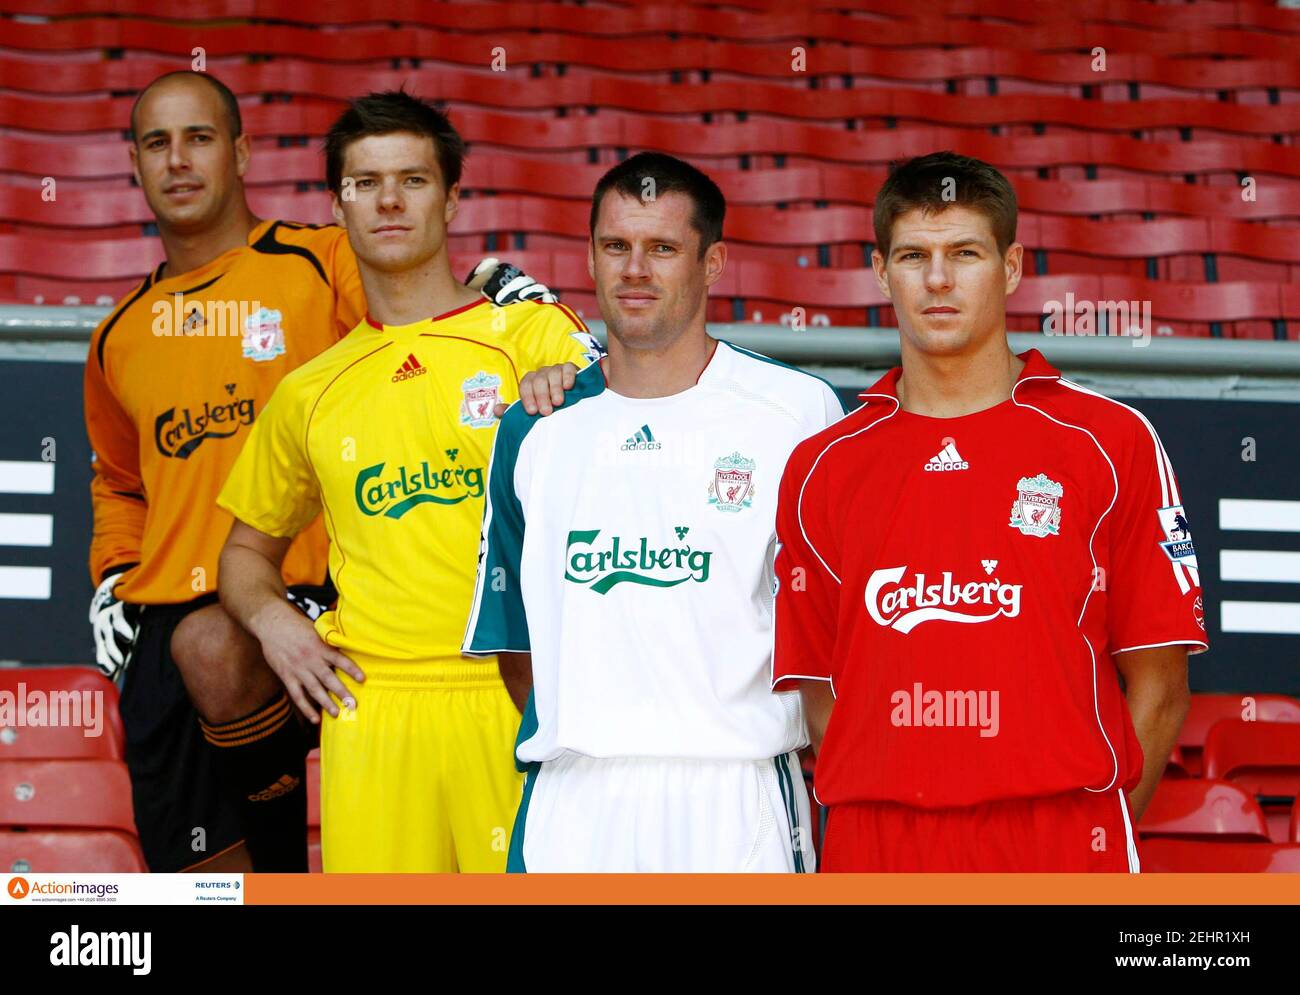 Football - Liverpool - adidas Official Kit Launch 2006/07 - Anfield - 24/7/ 06 Liverpool's Steven Gerrard in the new Adidas home kit, Xabi Alonso in  the away kit, Jamie Carragher in the